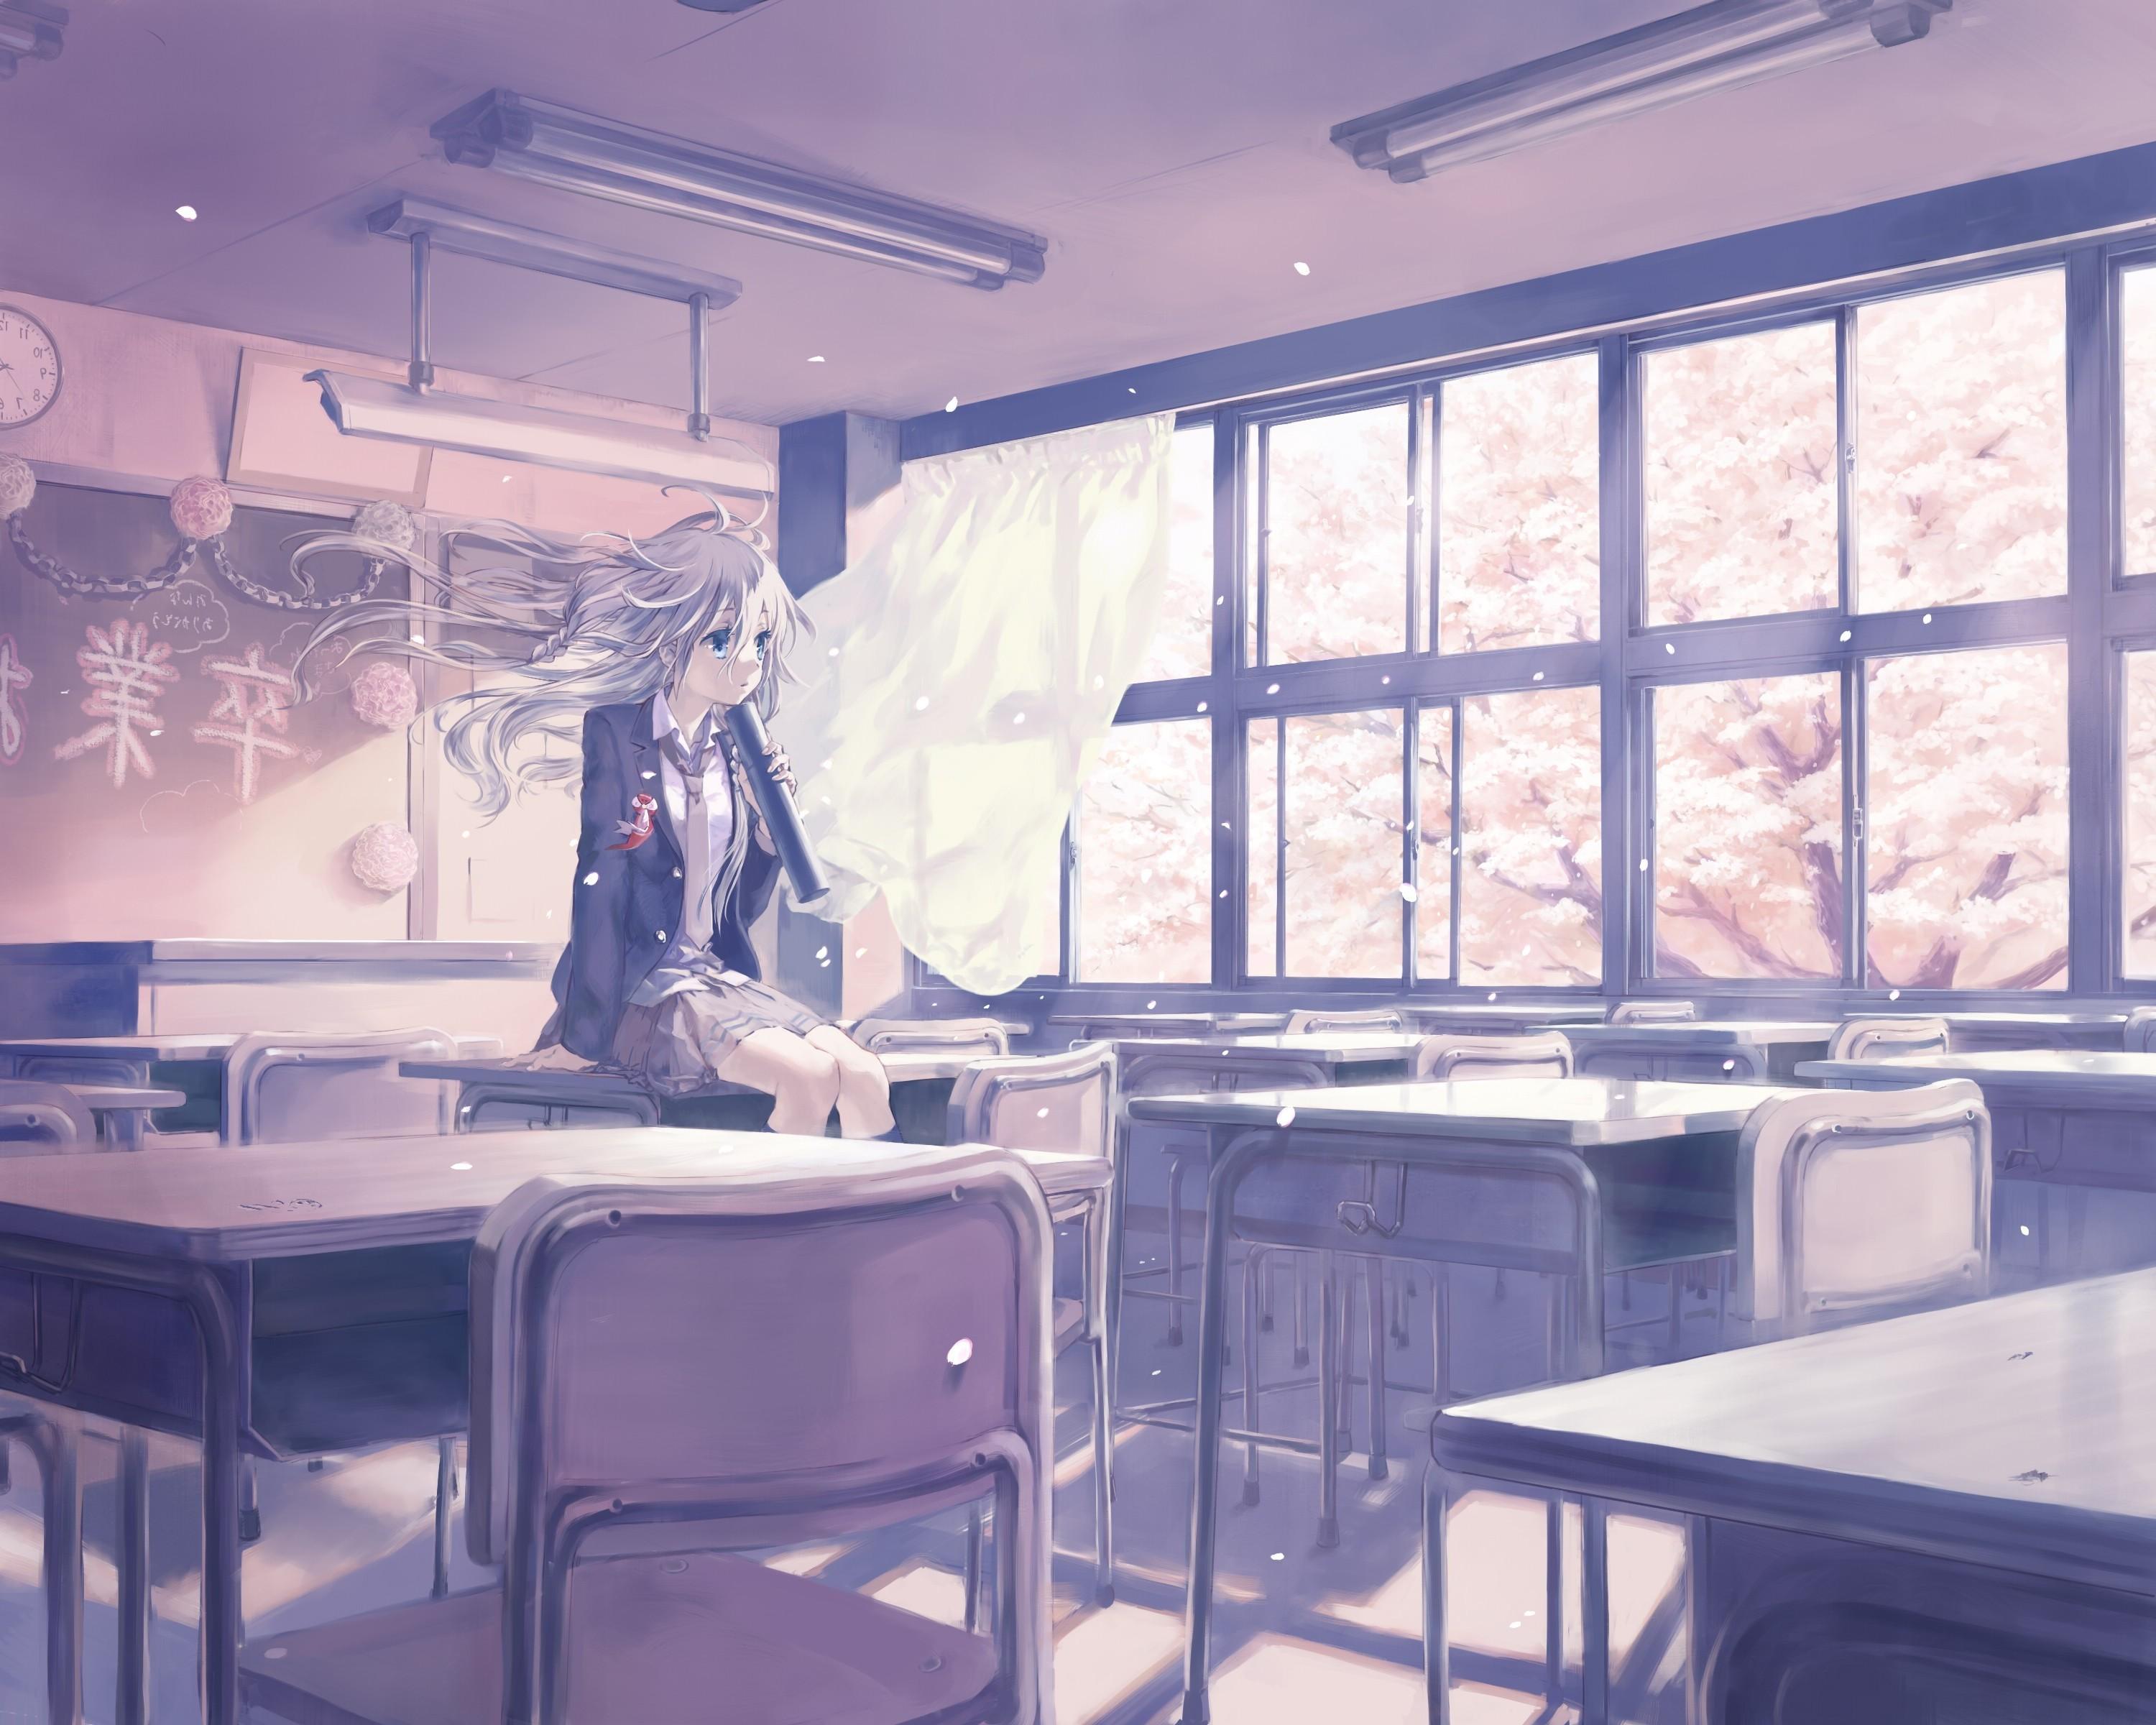 205 Anime Background Classroom Images, Stock Photos, 3D objects, & Vectors